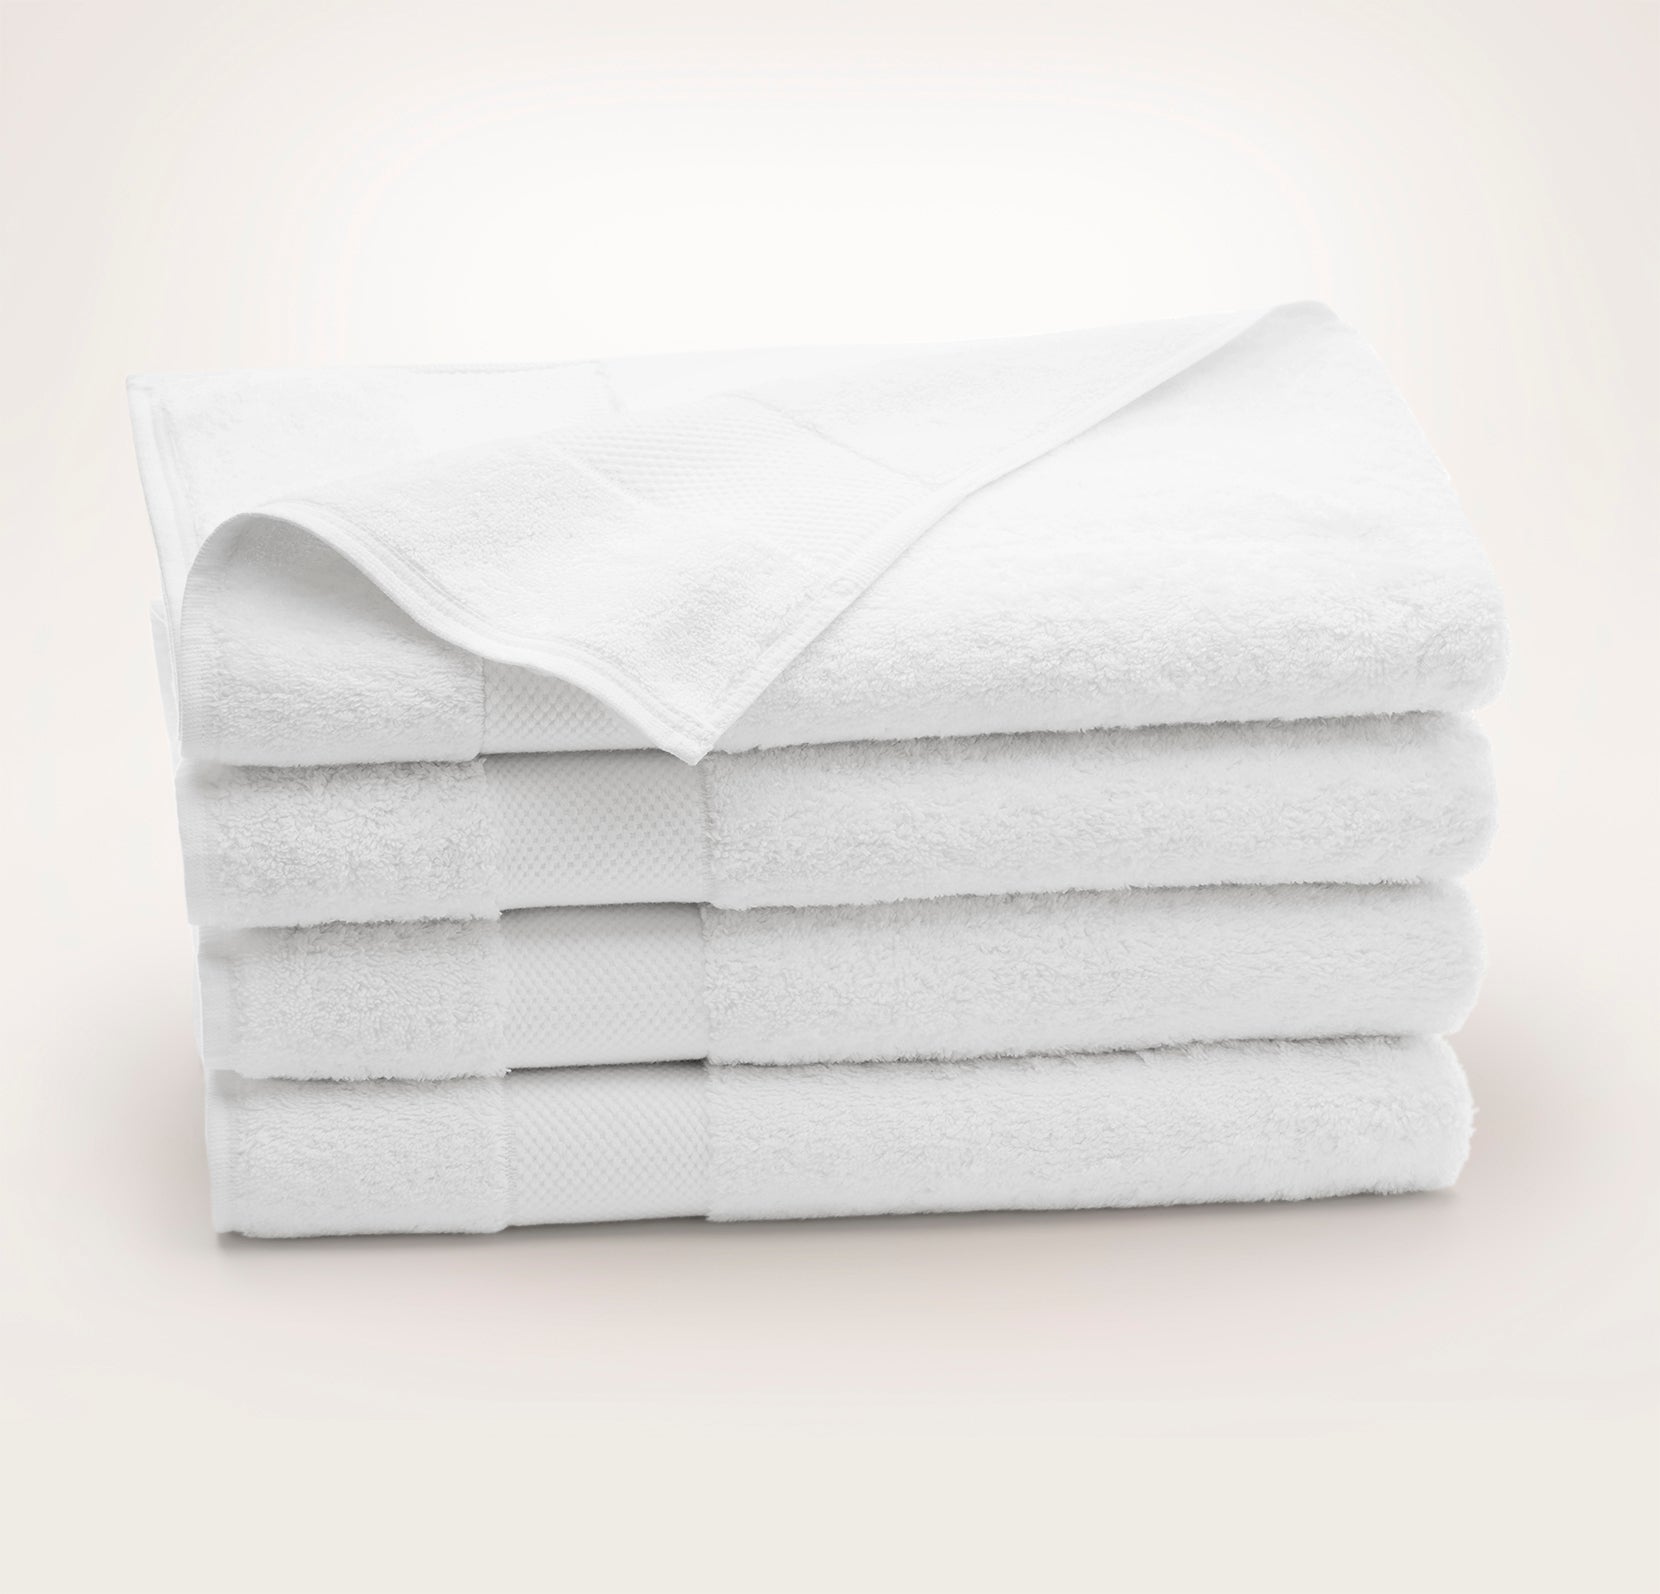 Four In One Towel Set: This set includes four towels, providing